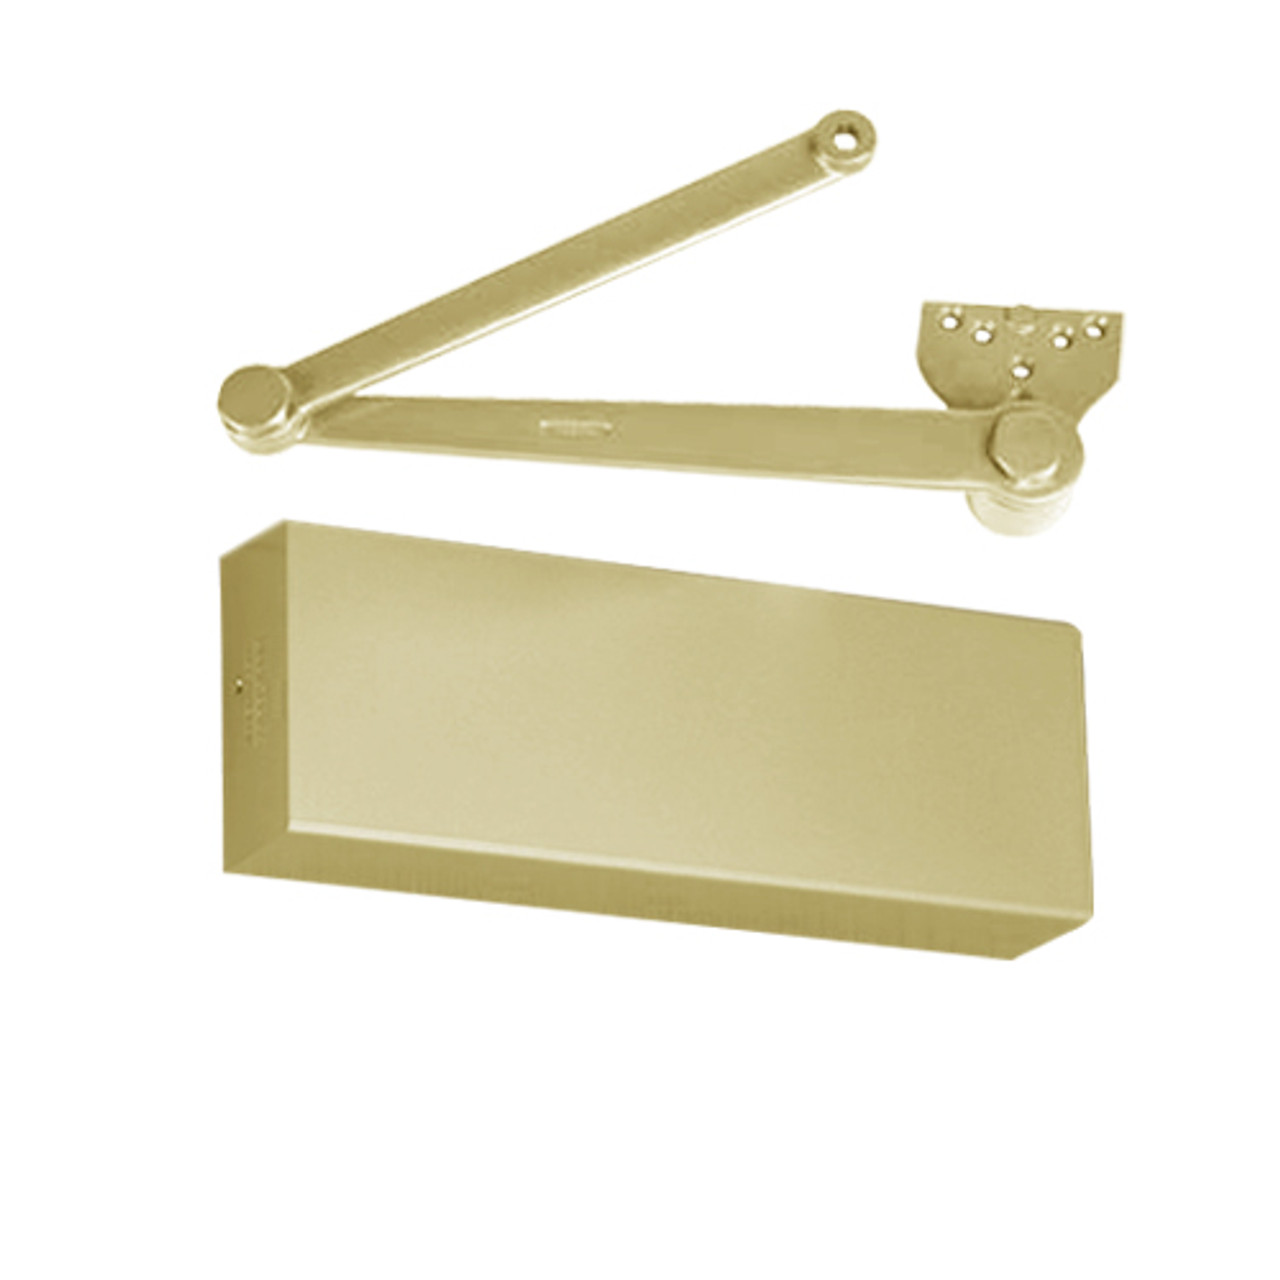 PRO9500-696 Norton 9500 Series Non-Hold Open Cast Iron Door Closer with Parallel Rigid Offset Arm in Gold Finish